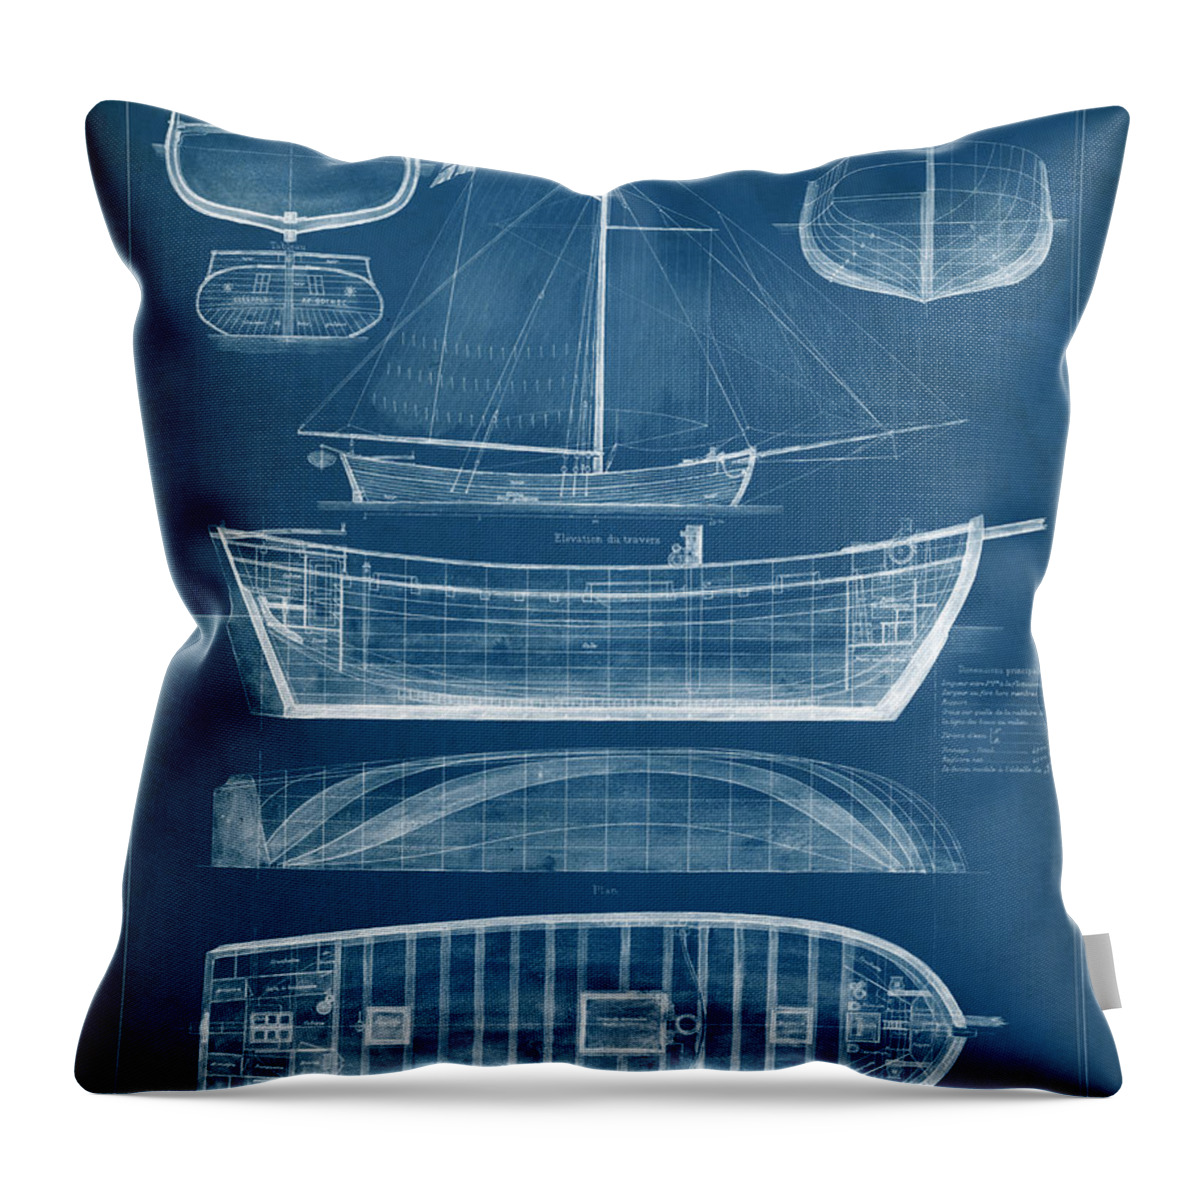 Home Throw Pillow featuring the painting Antique Ship Blueprint II by Vision Studio